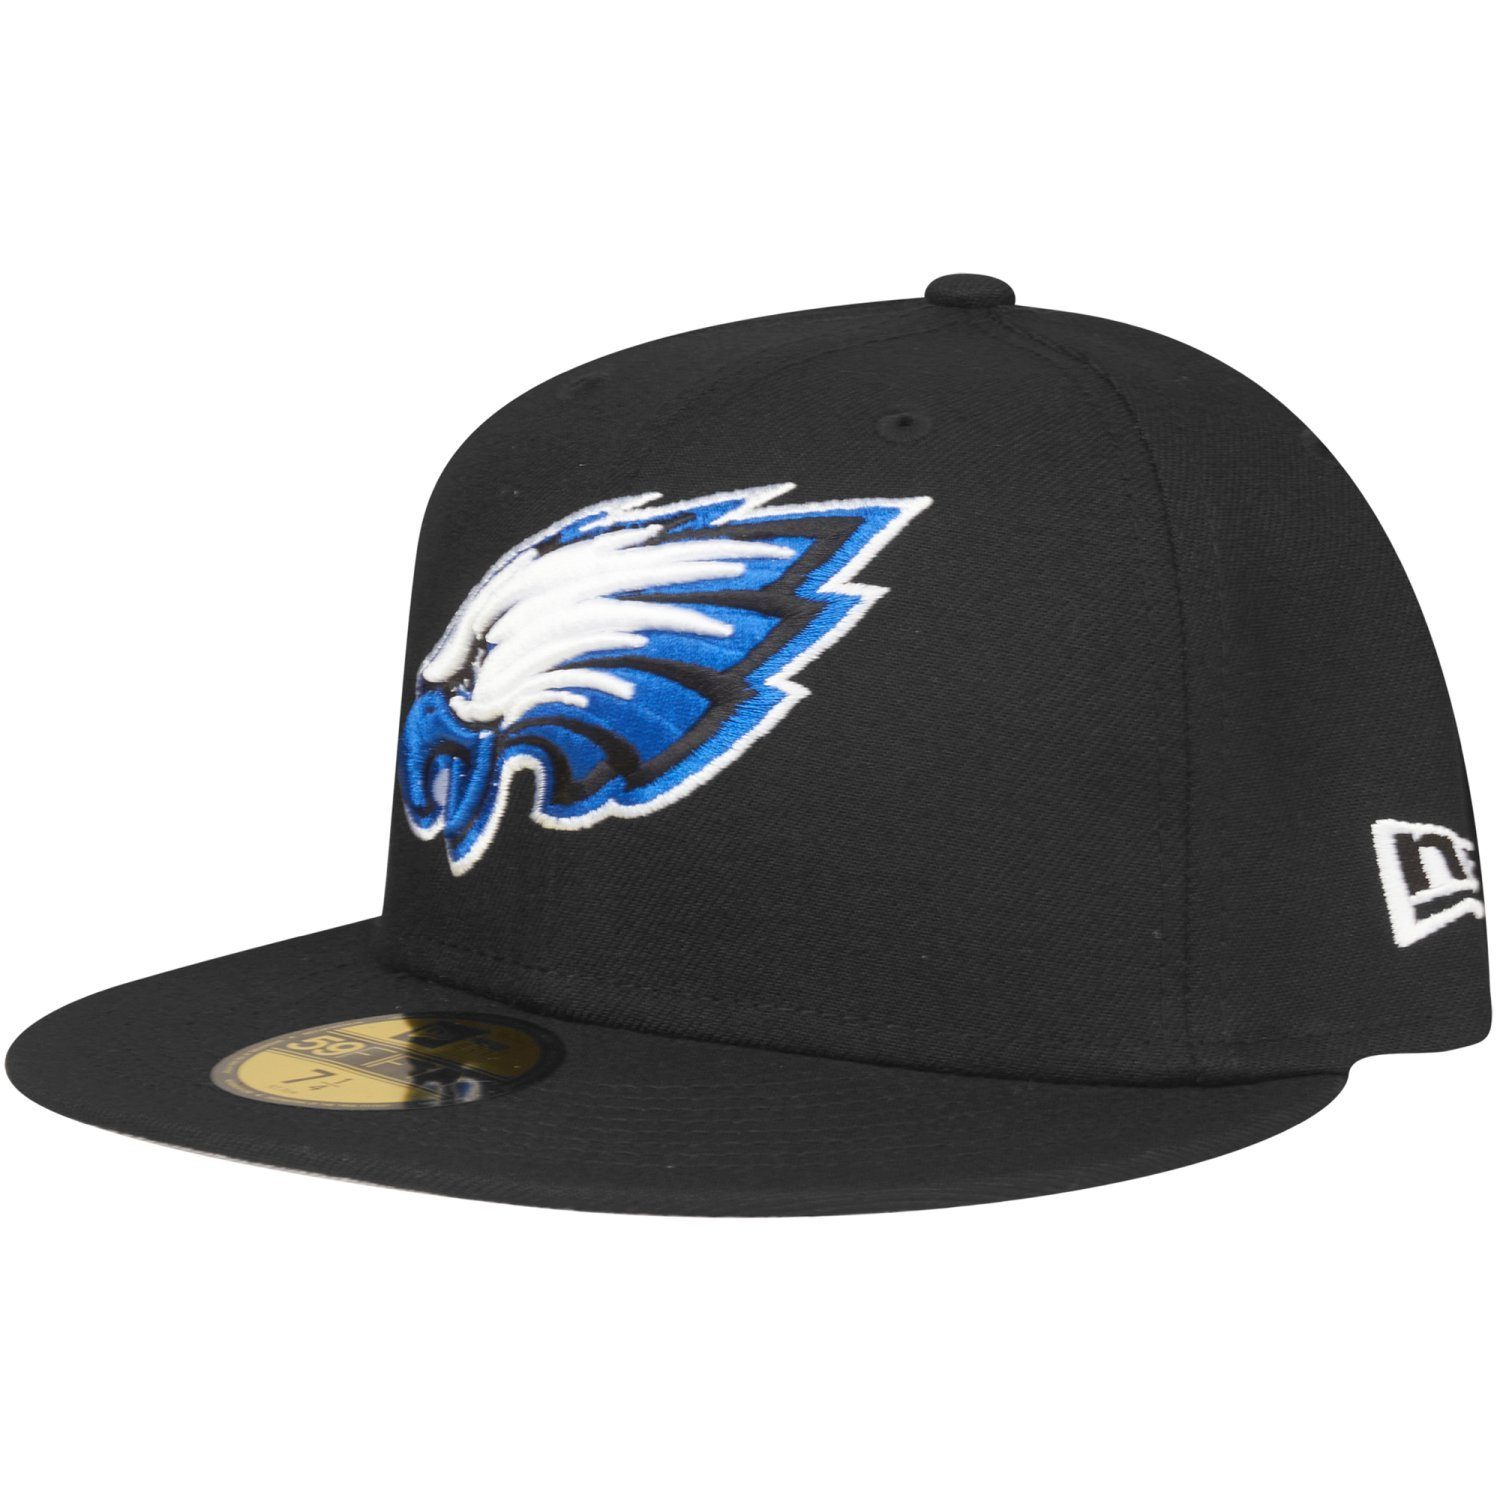 New Era Fitted Cap 59Fifty NFL TEAMS Philadelphia Eagles